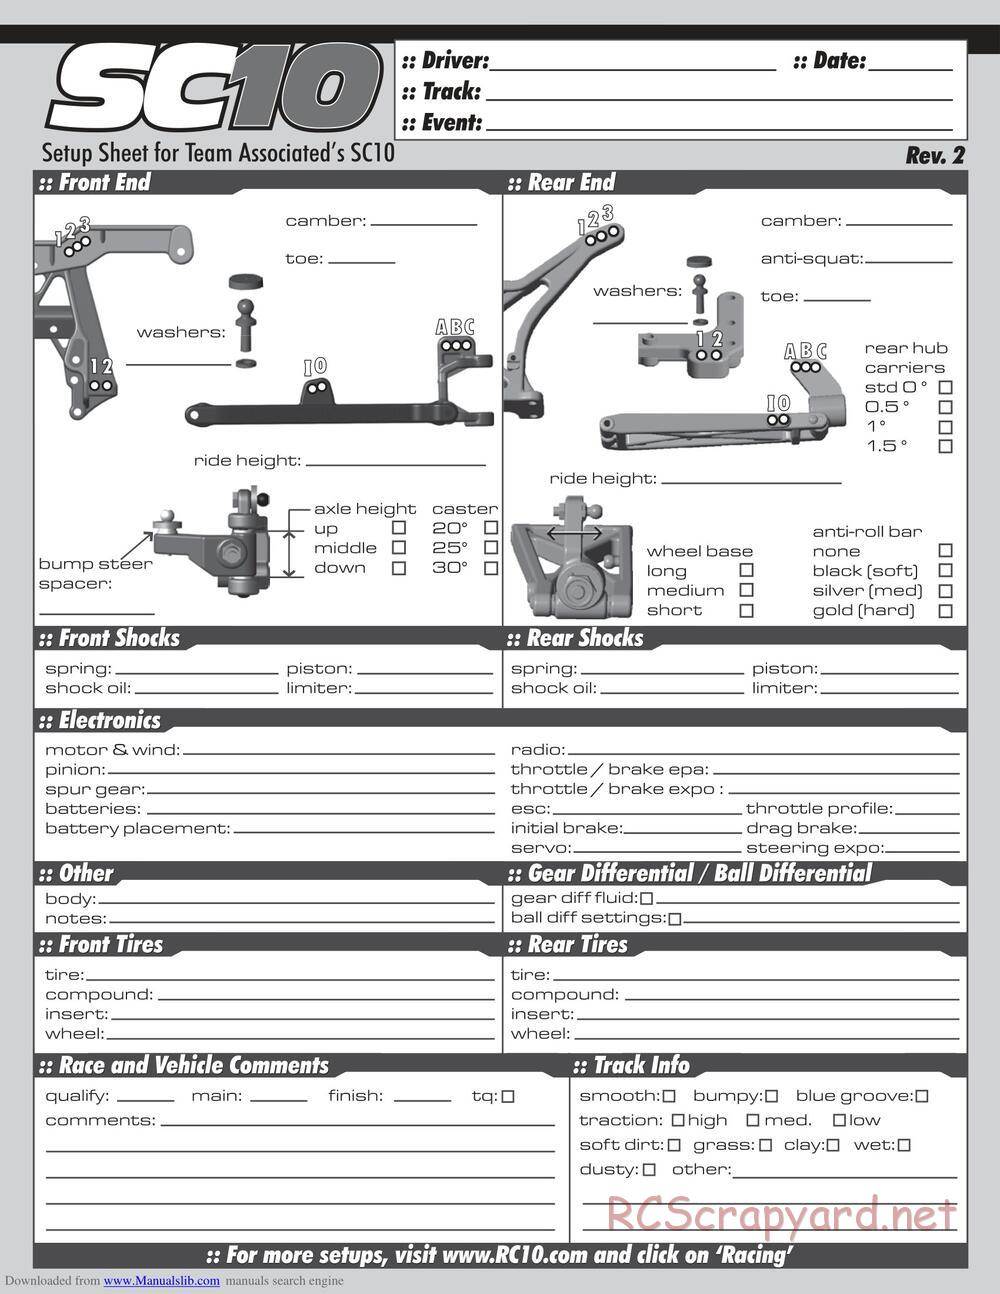 Team Associated - SC10 Factory Team - Manual - Page 33